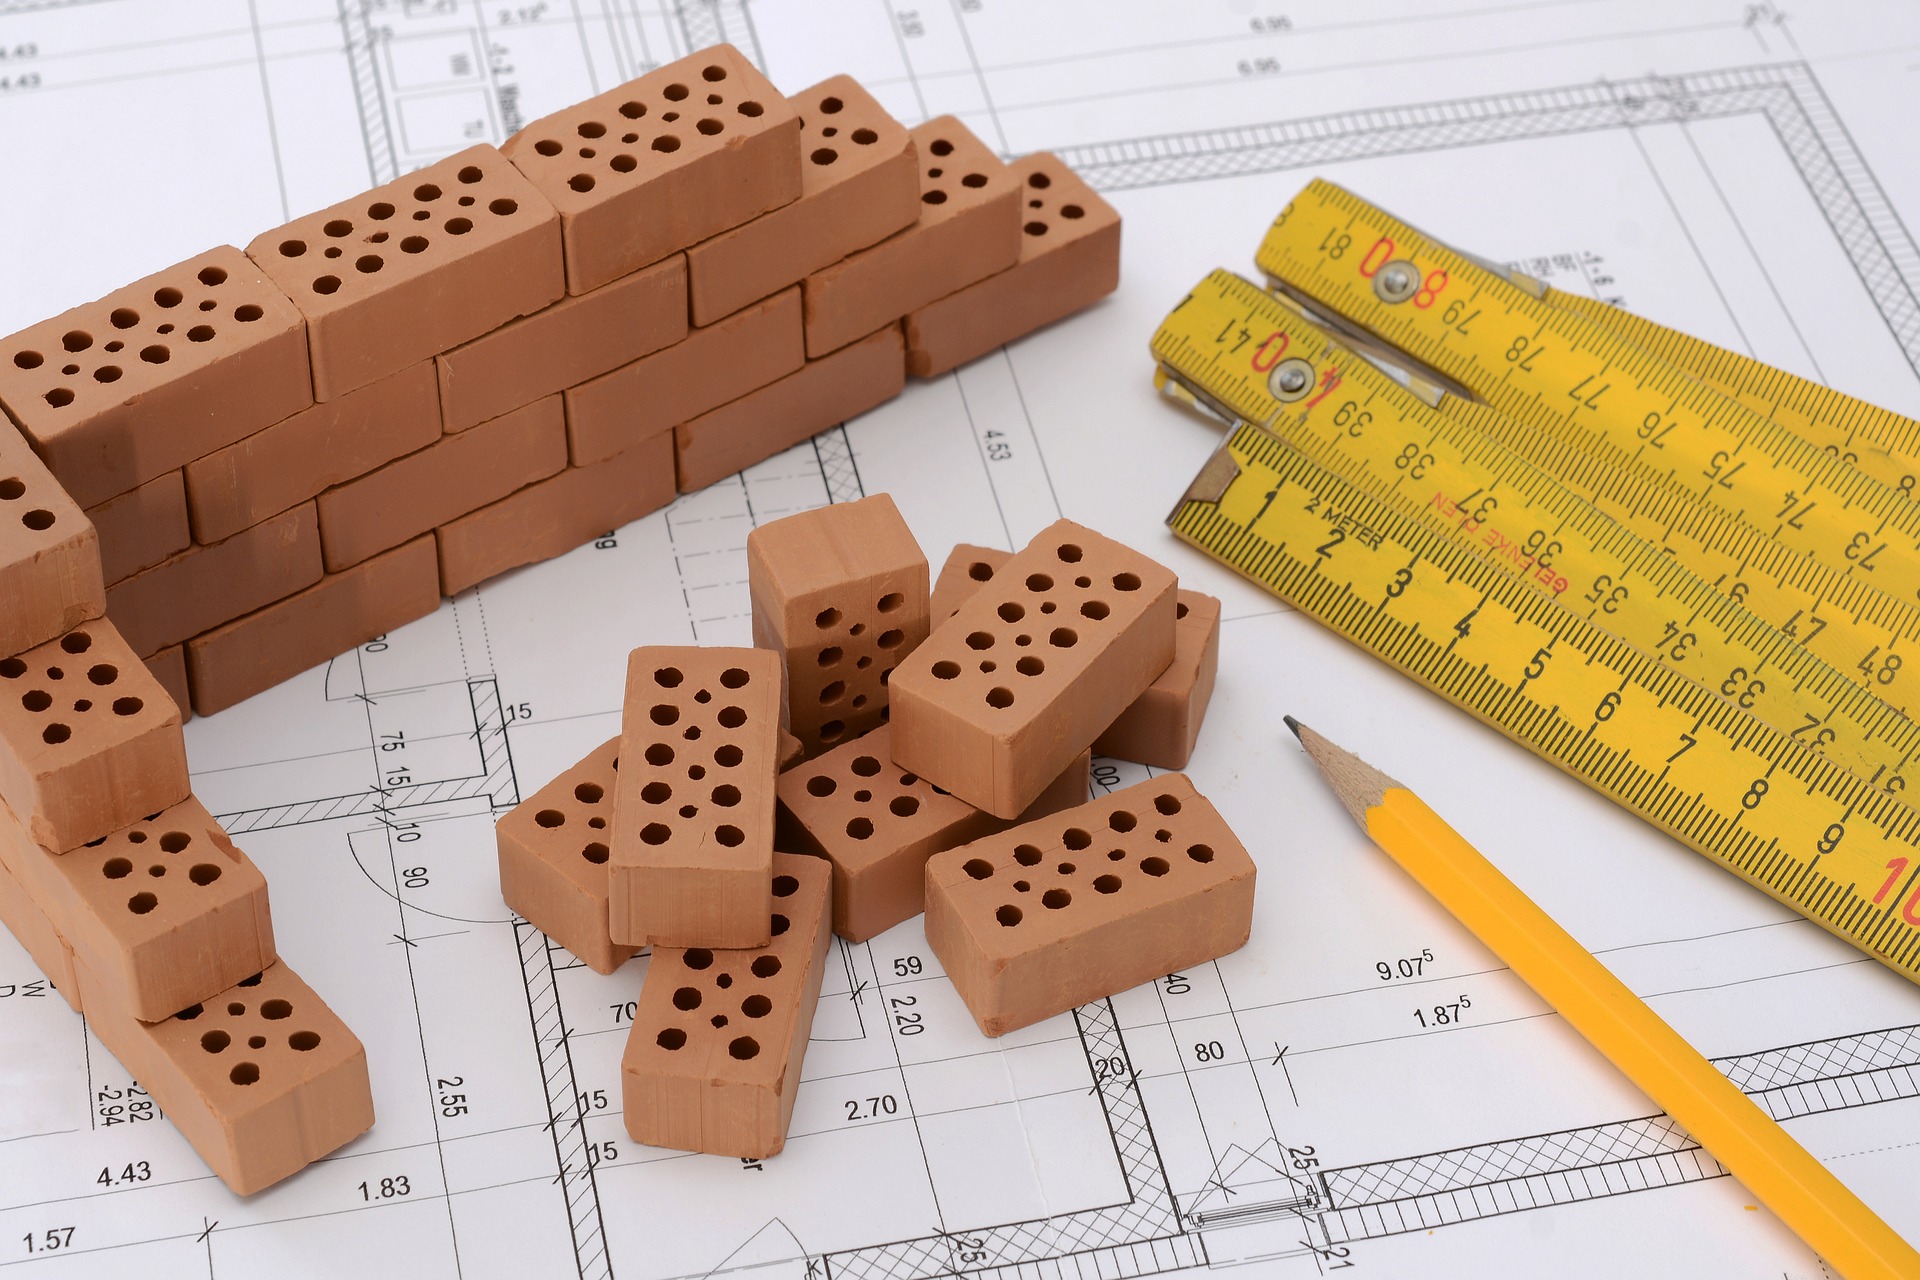 Miniature bricks form part of a structure next to a pencil and multiple tape measures on top of a blue print.